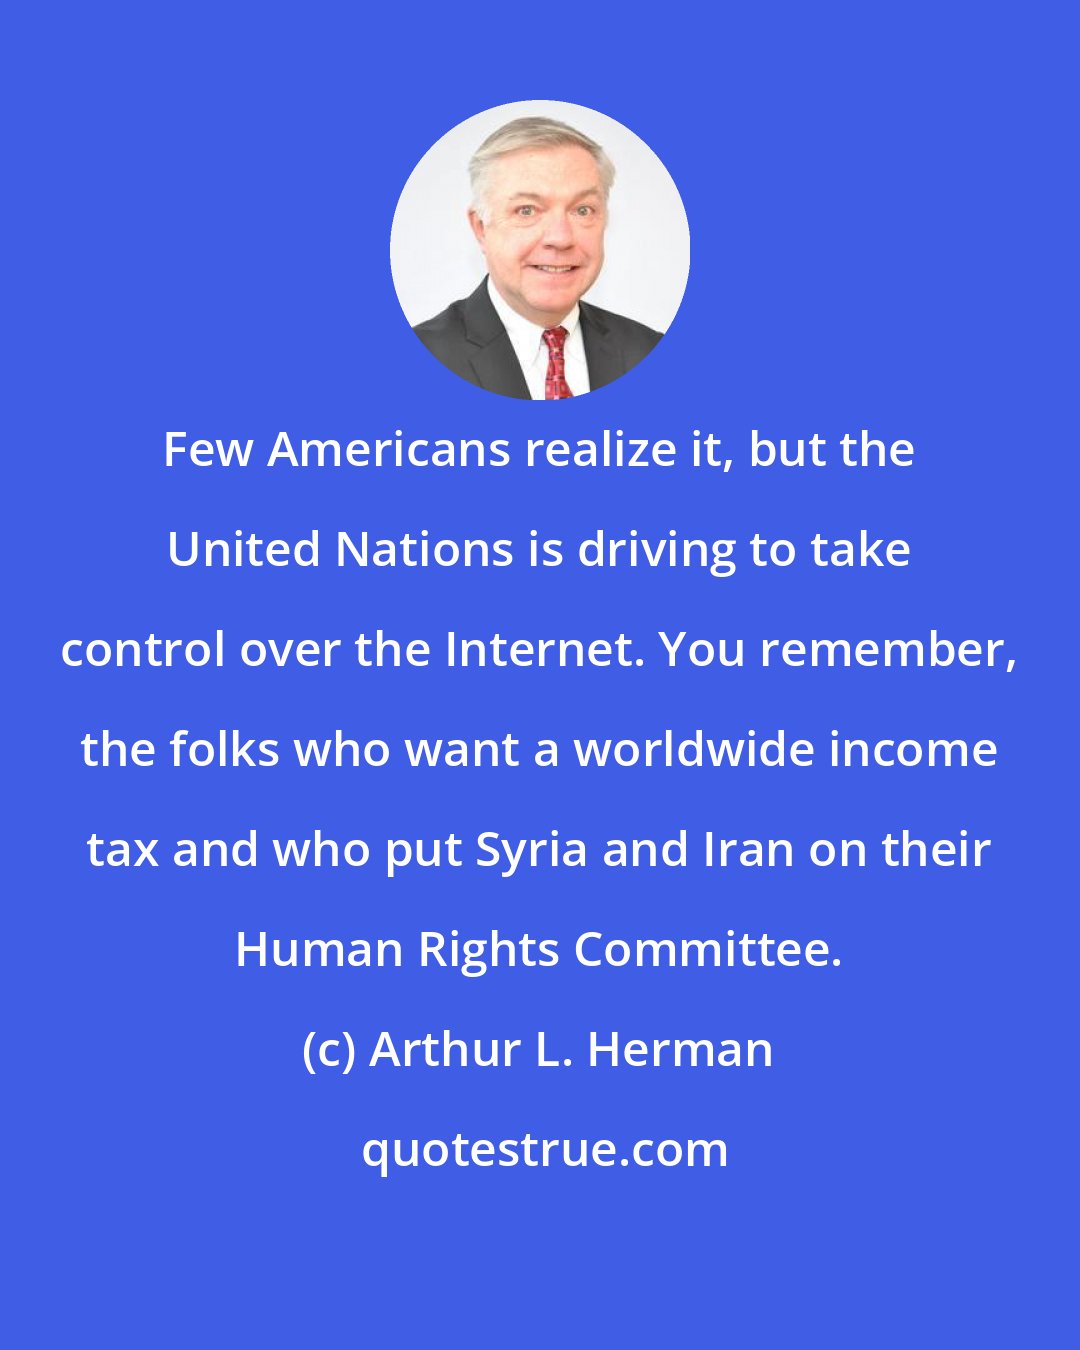 Arthur L. Herman: Few Americans realize it, but the United Nations is driving to take control over the Internet. You remember, the folks who want a worldwide income tax and who put Syria and Iran on their Human Rights Committee.